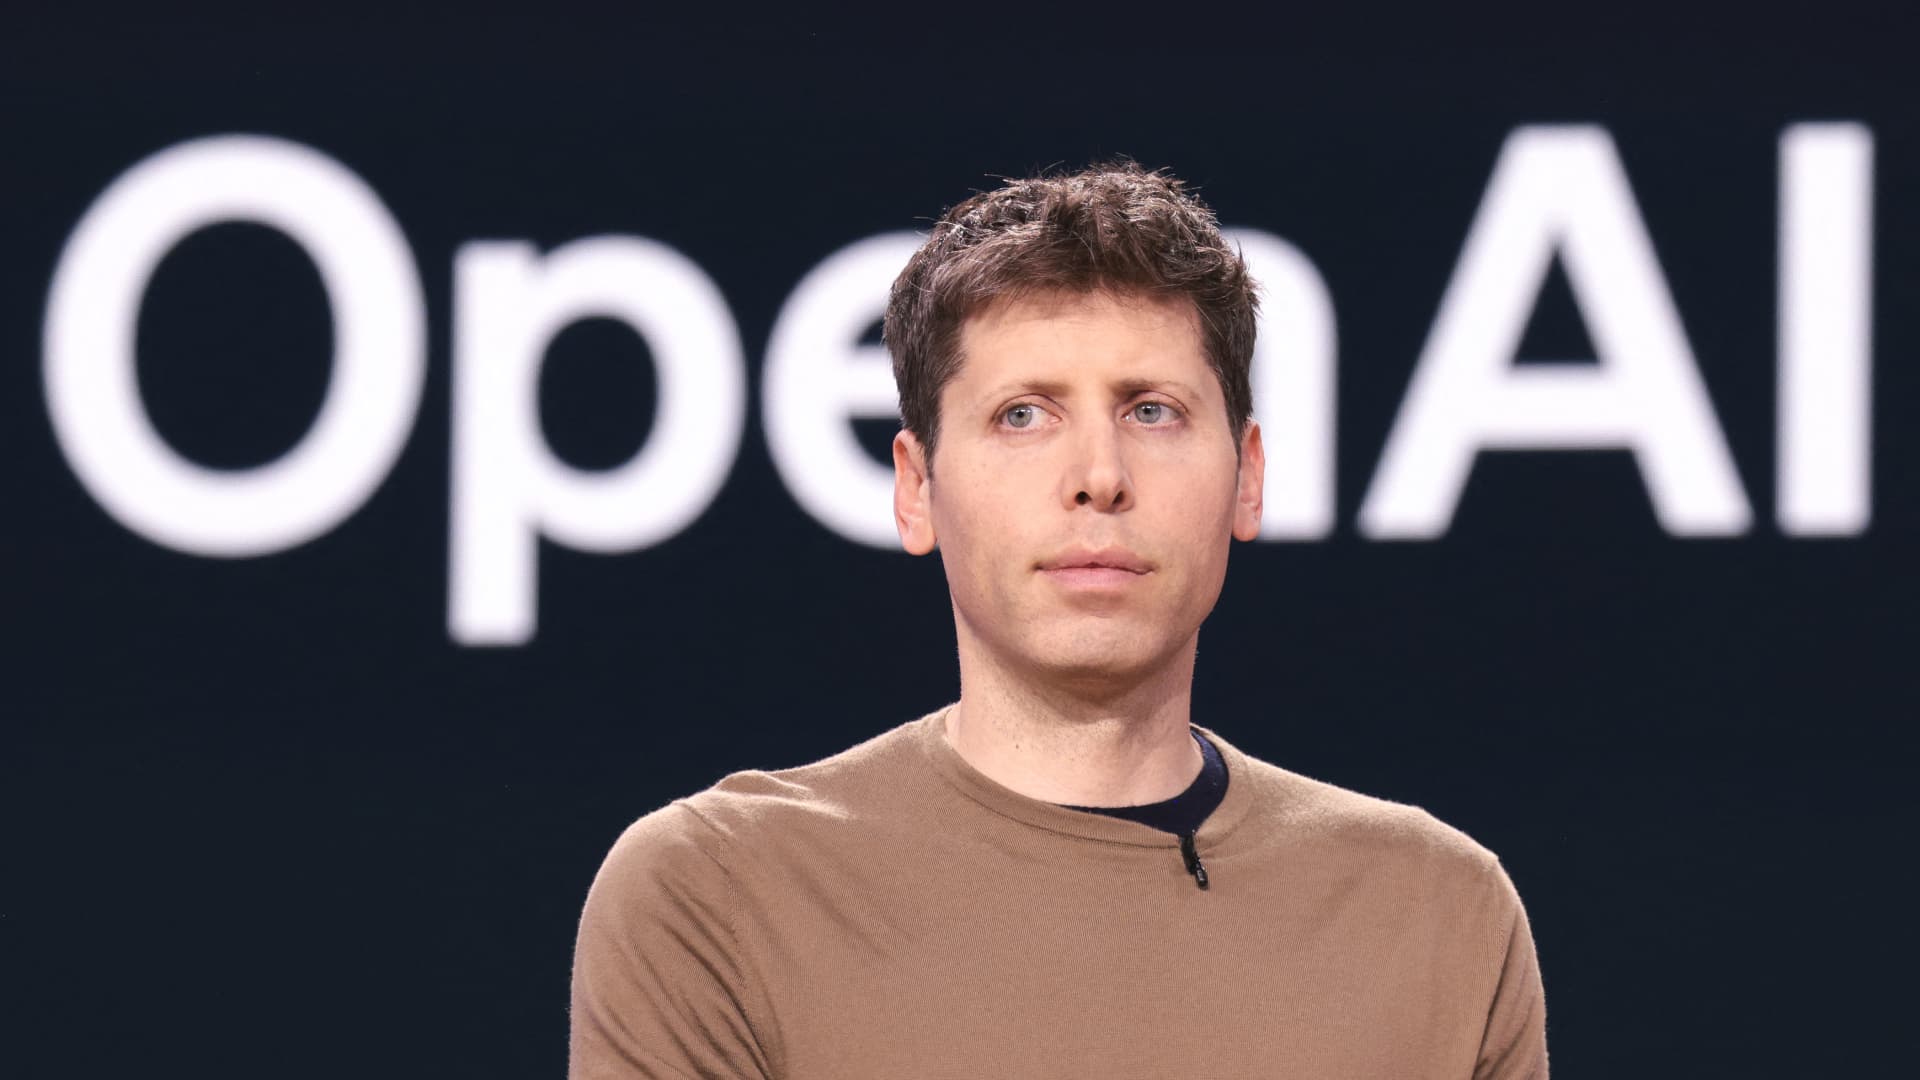 OpenAI insider stock sales are raising concern among ex-employees